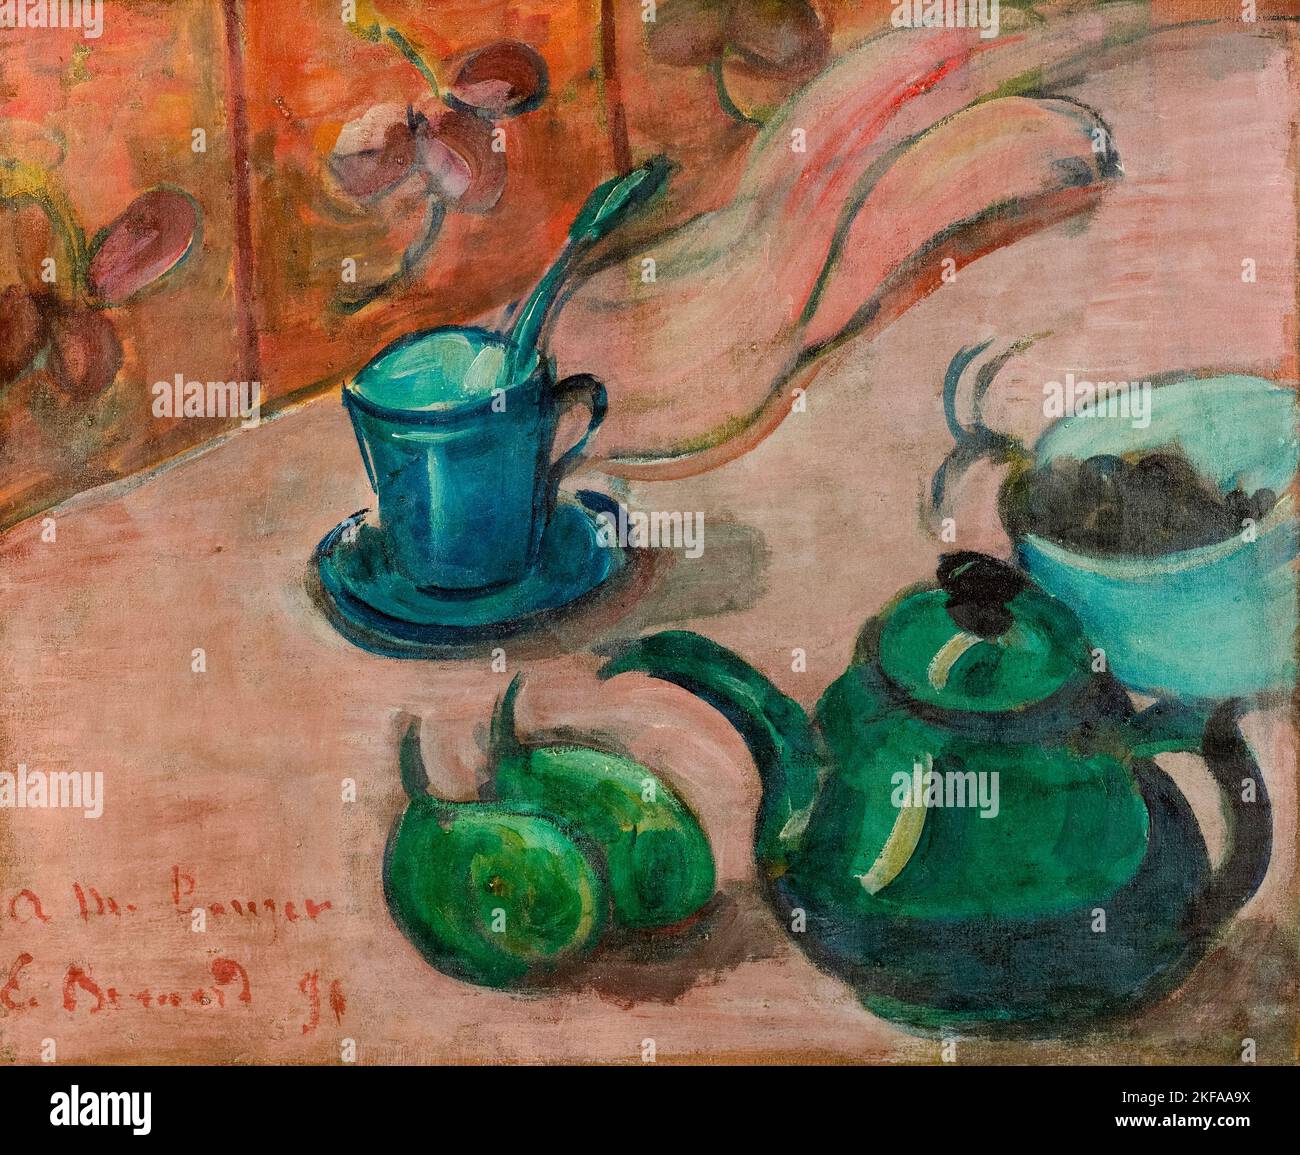 https://c8.alamy.com/comp/2KFAA9X/emile-bernard-still-life-with-teapot-cup-and-fruit-painting-in-oil-on-canvas-1890-2KFAA9X.jpg